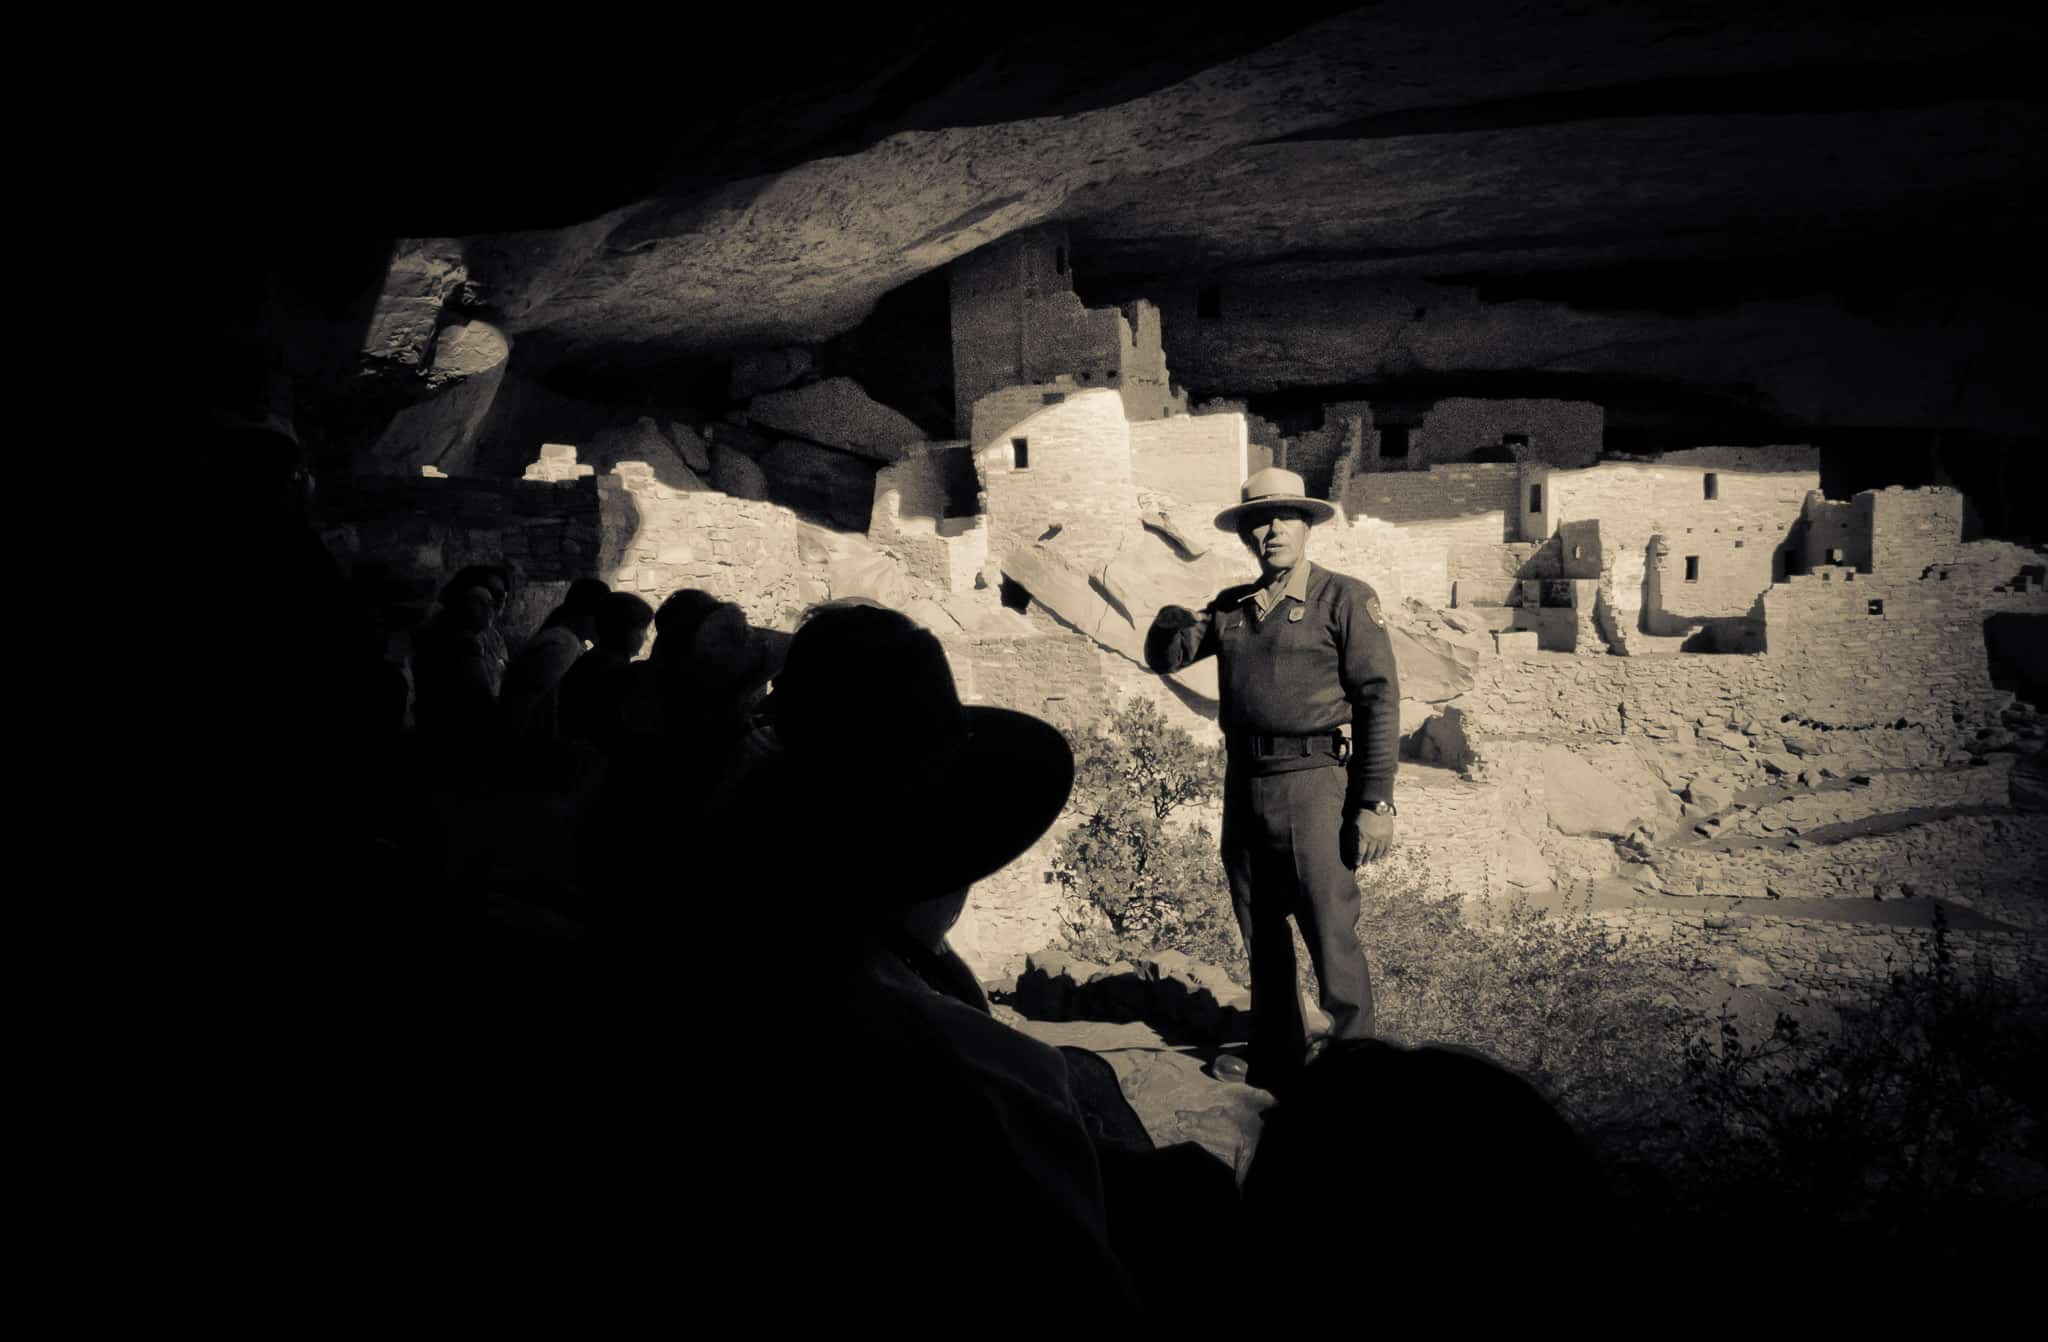 An Interpretive Ranger talks to a group of visitors in Cliff Palace at Mesa Verde National Park near Cortez, Colorado.